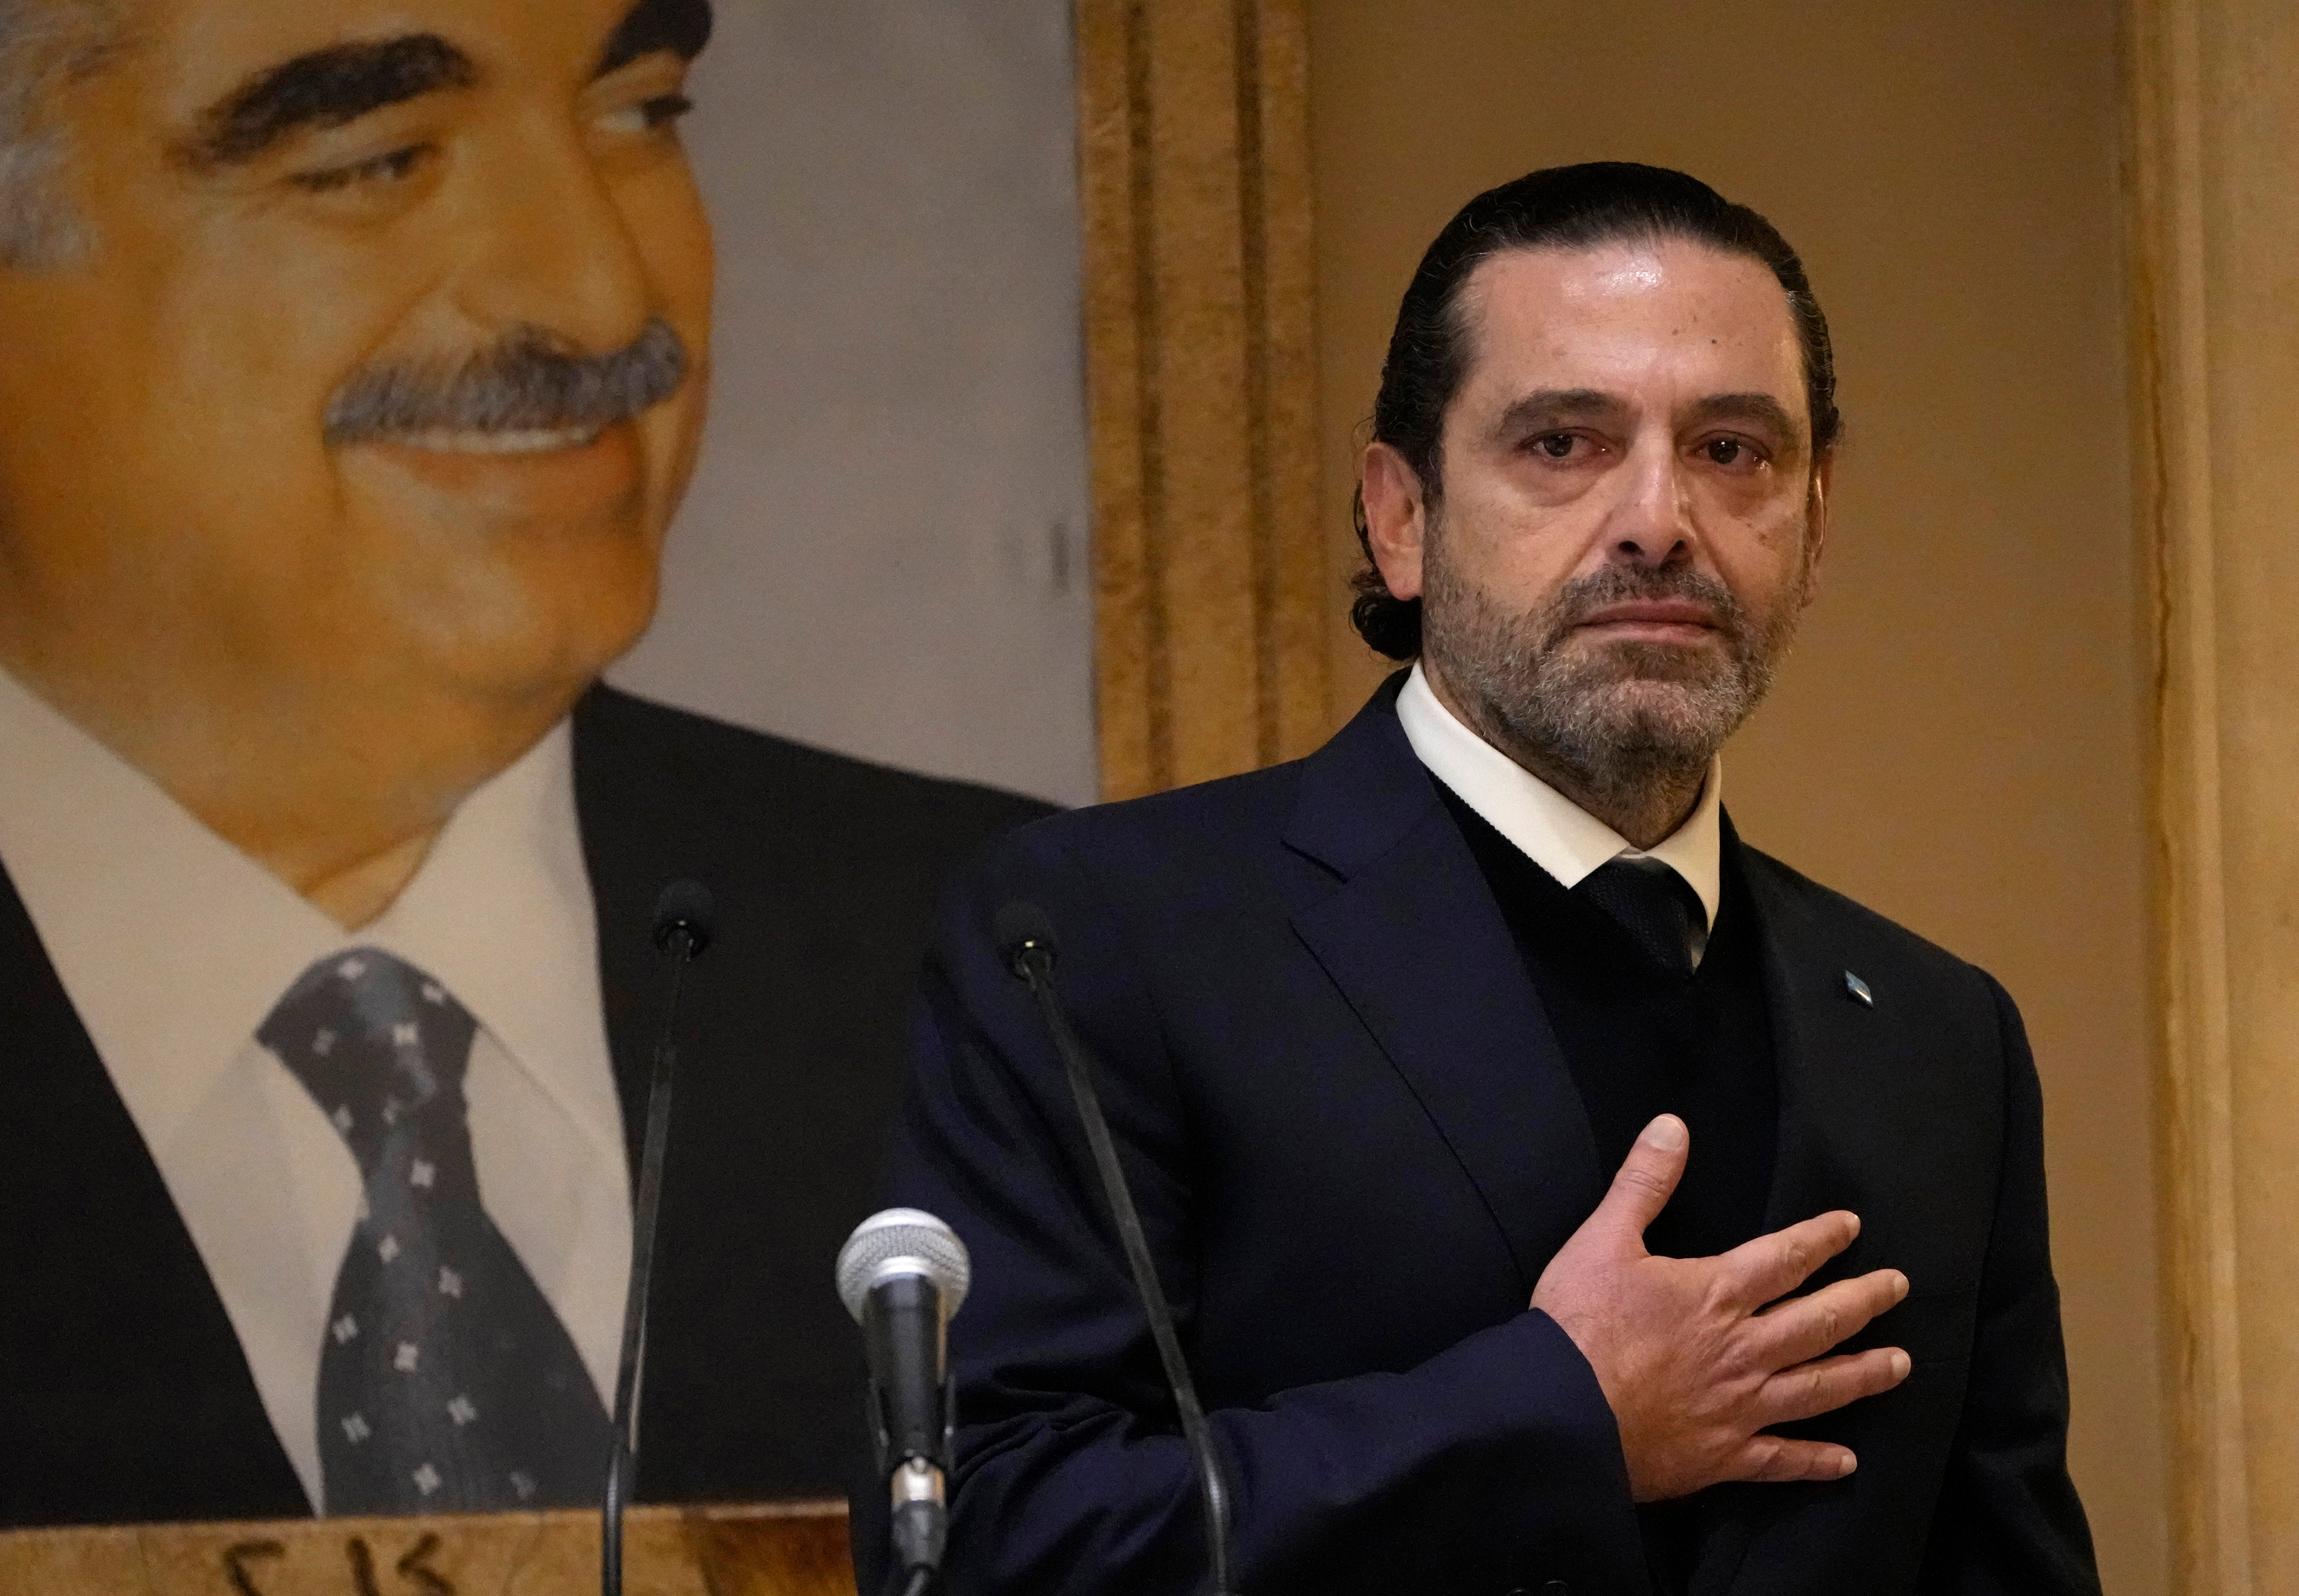 Former Lebanese Prime Minister Saad Hariri appears emotional following his announcement in Beirut, Lebanon, 24 January 2022